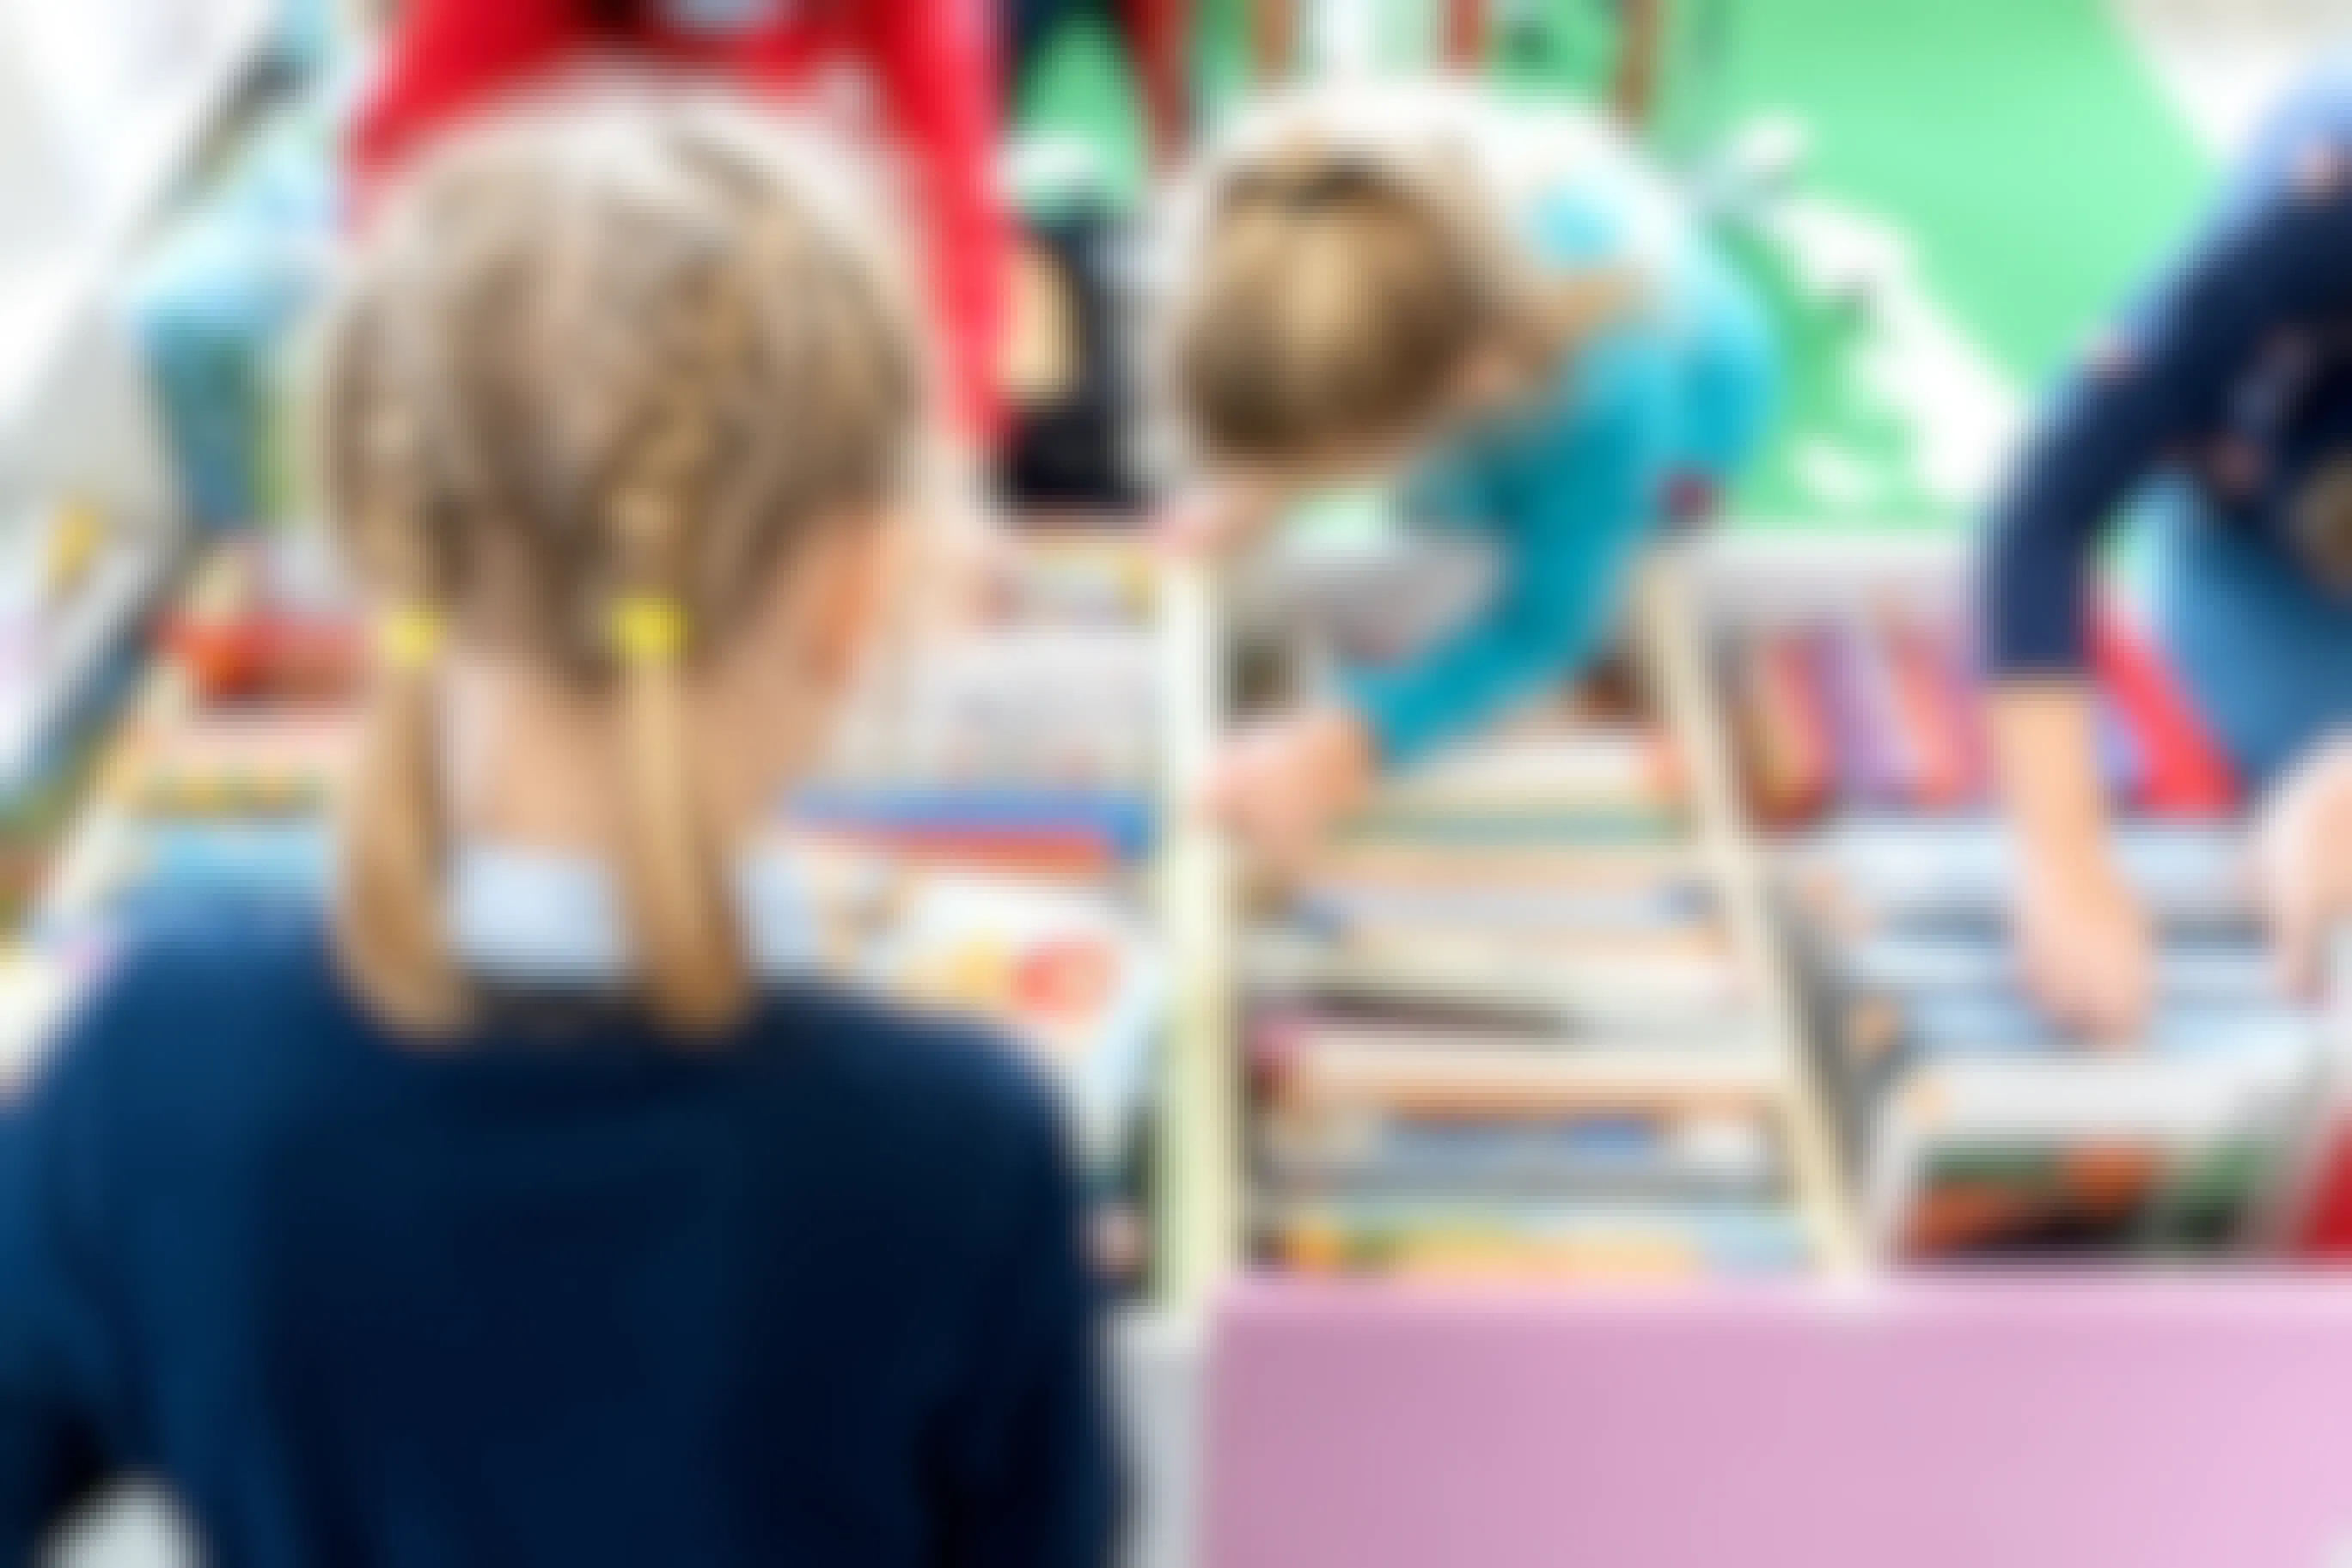 A child with French braids, facing away from the camera, looking at a bin full of books that other children are looking through.